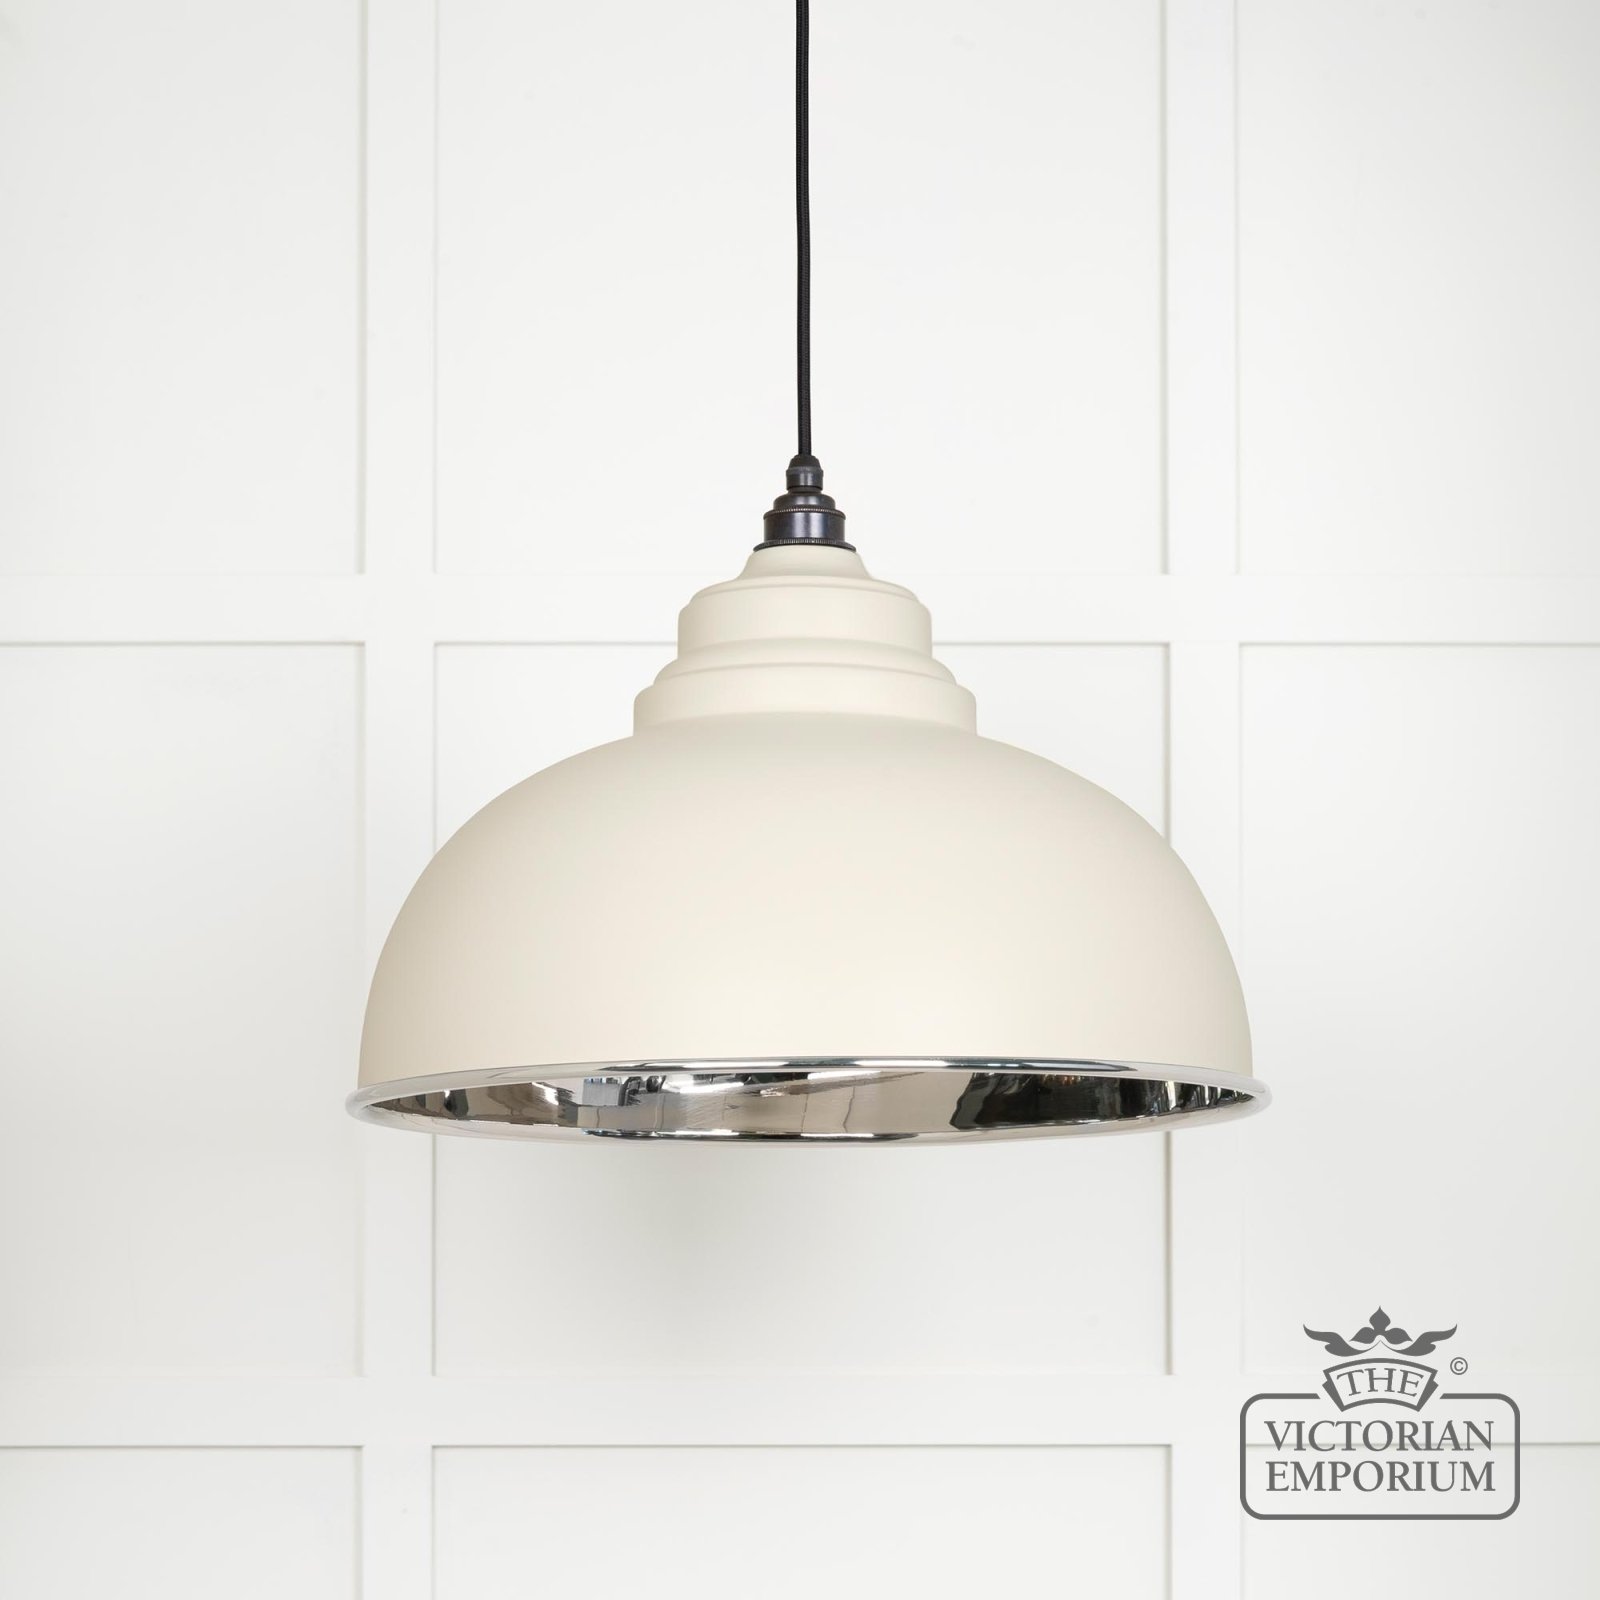 Harlow Pendant Light in Smooth Nickel with Teasel Exterior